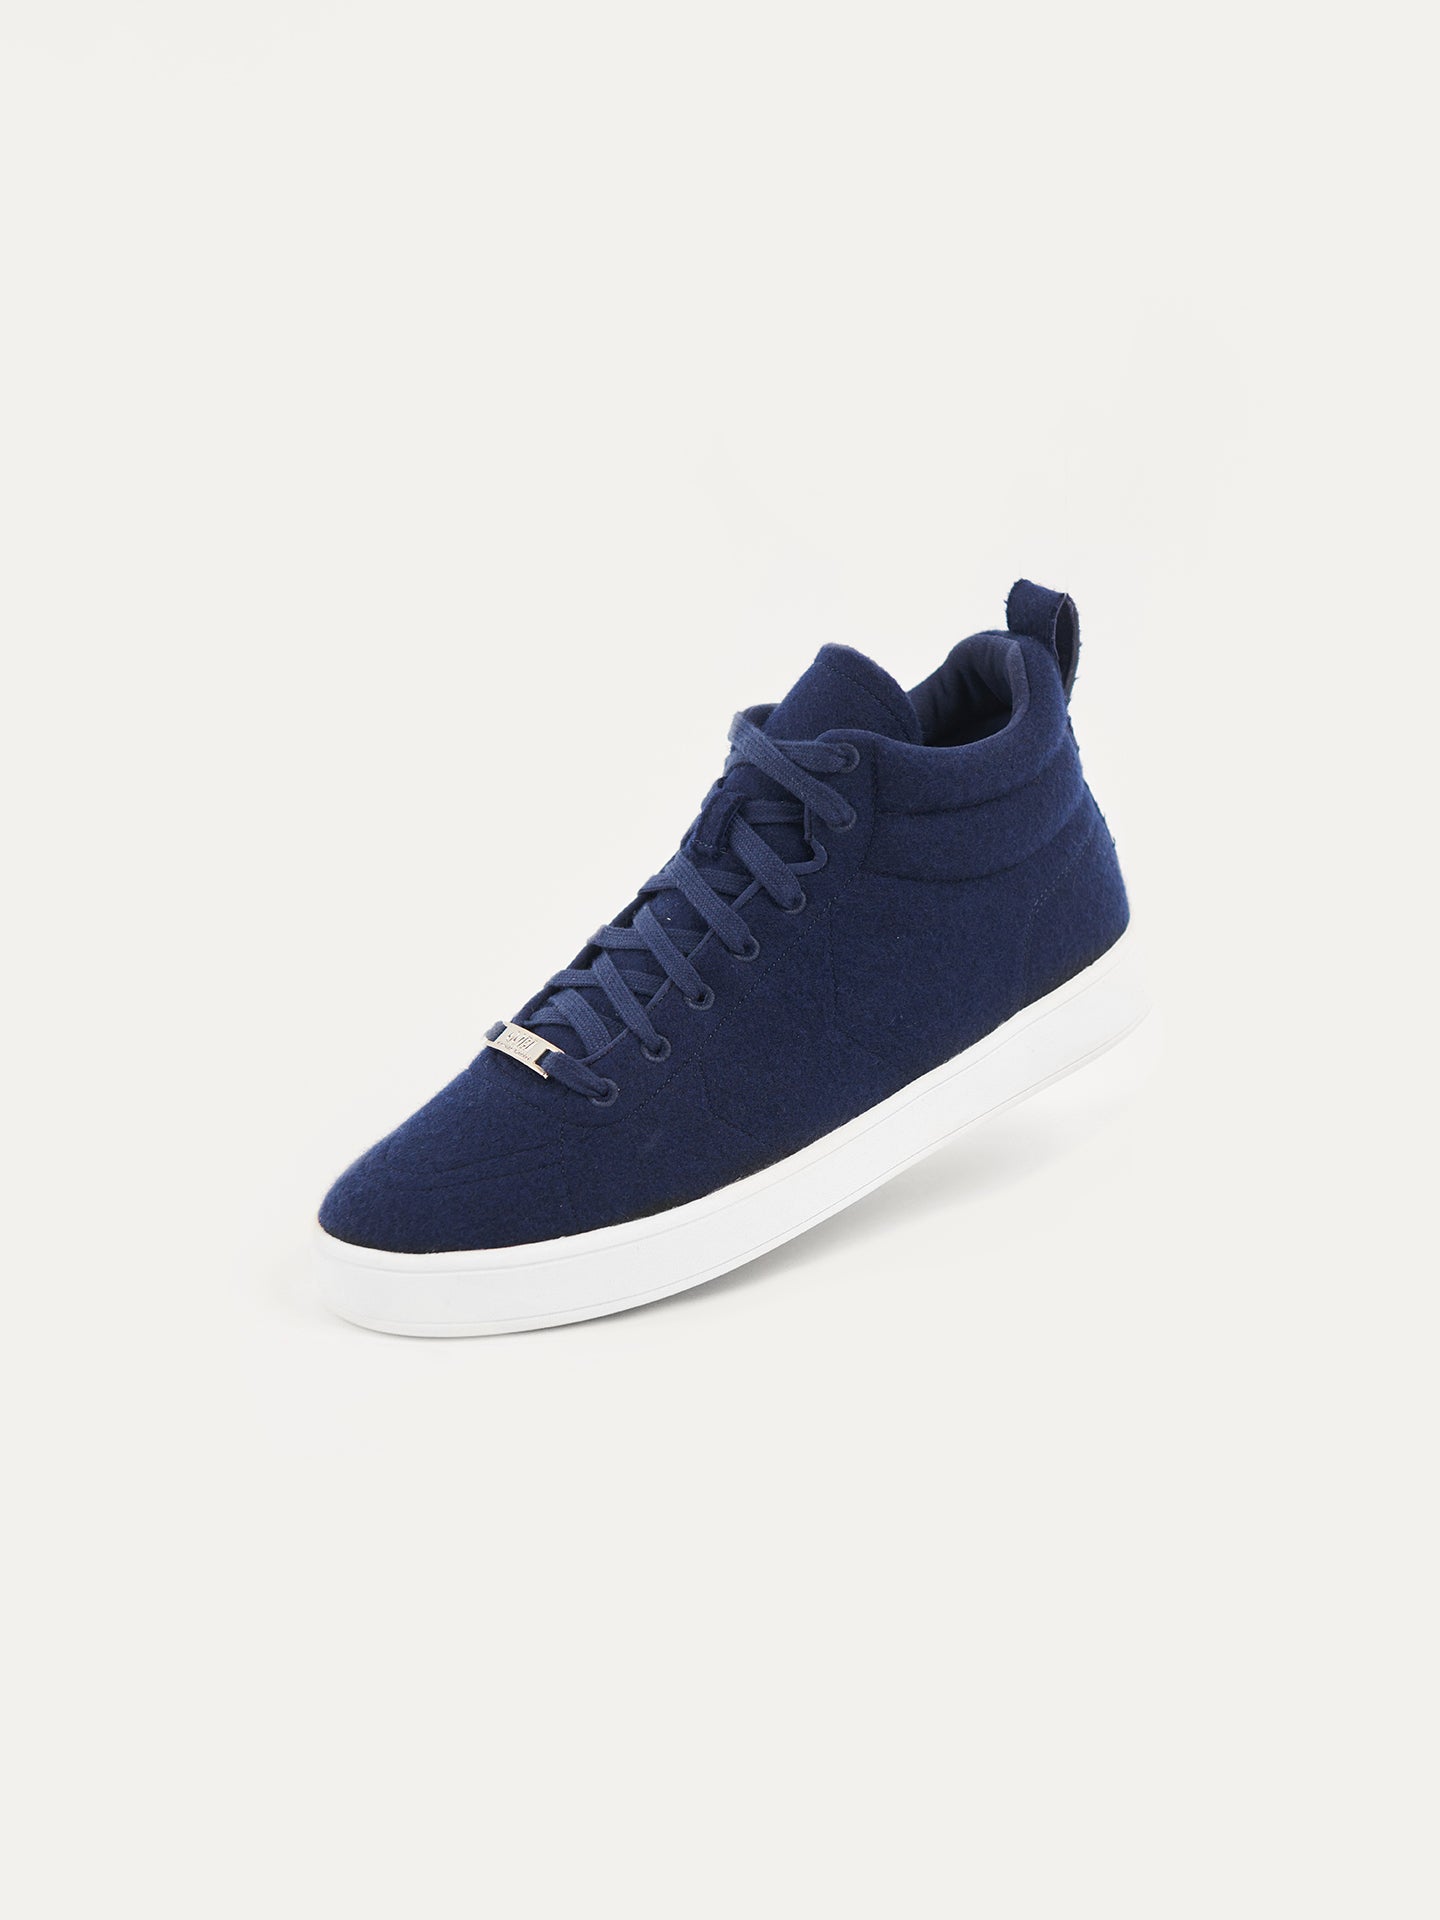 Unisex Cashmere High-Top Sneakers Navy - Gobi Cashmere